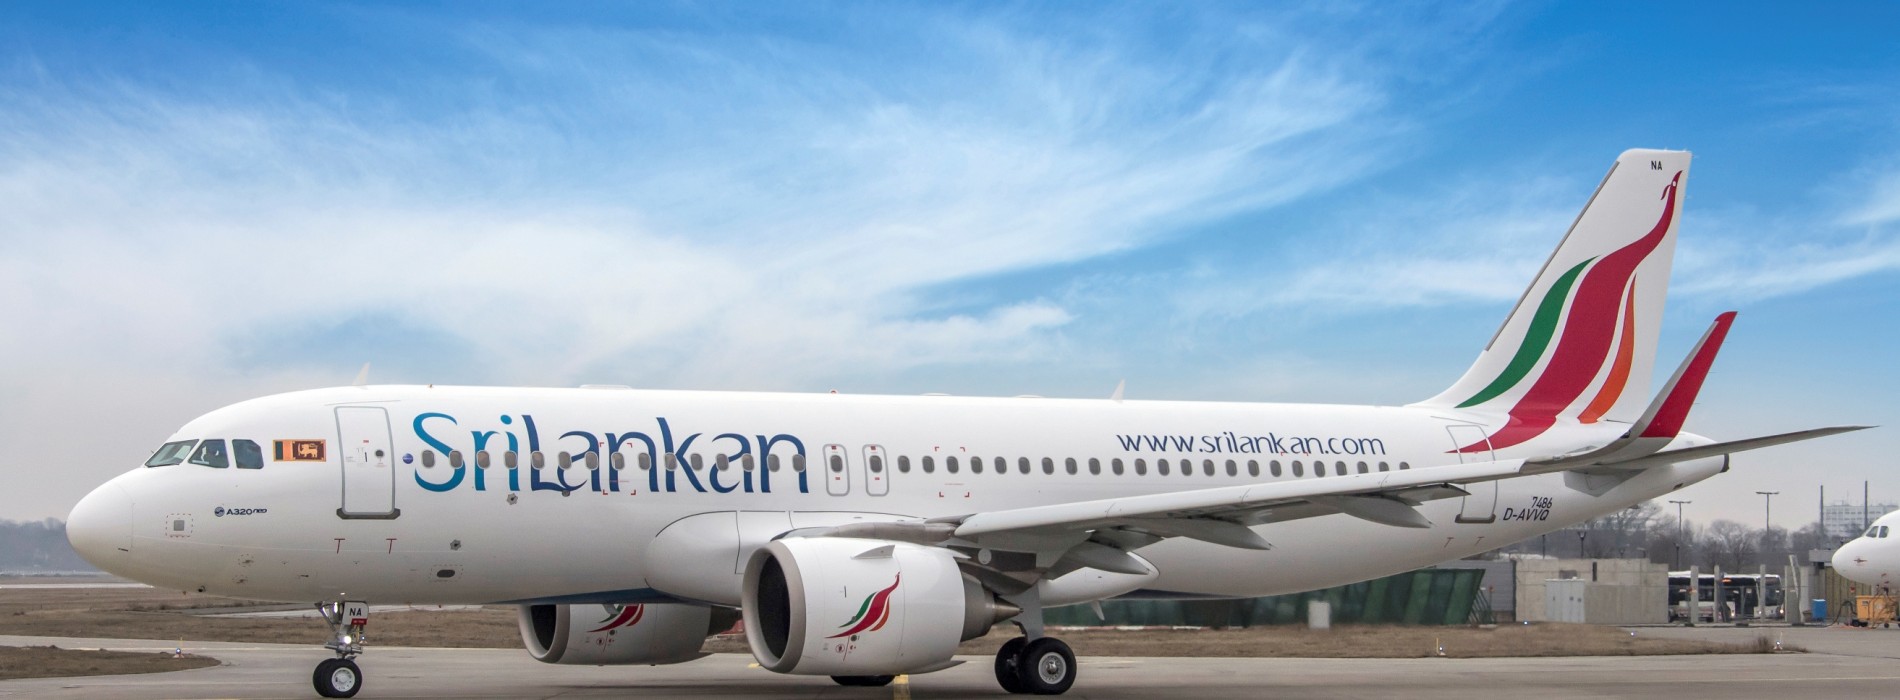 SriLankan Airlines announces big discount bonanza in November for Indian travellers